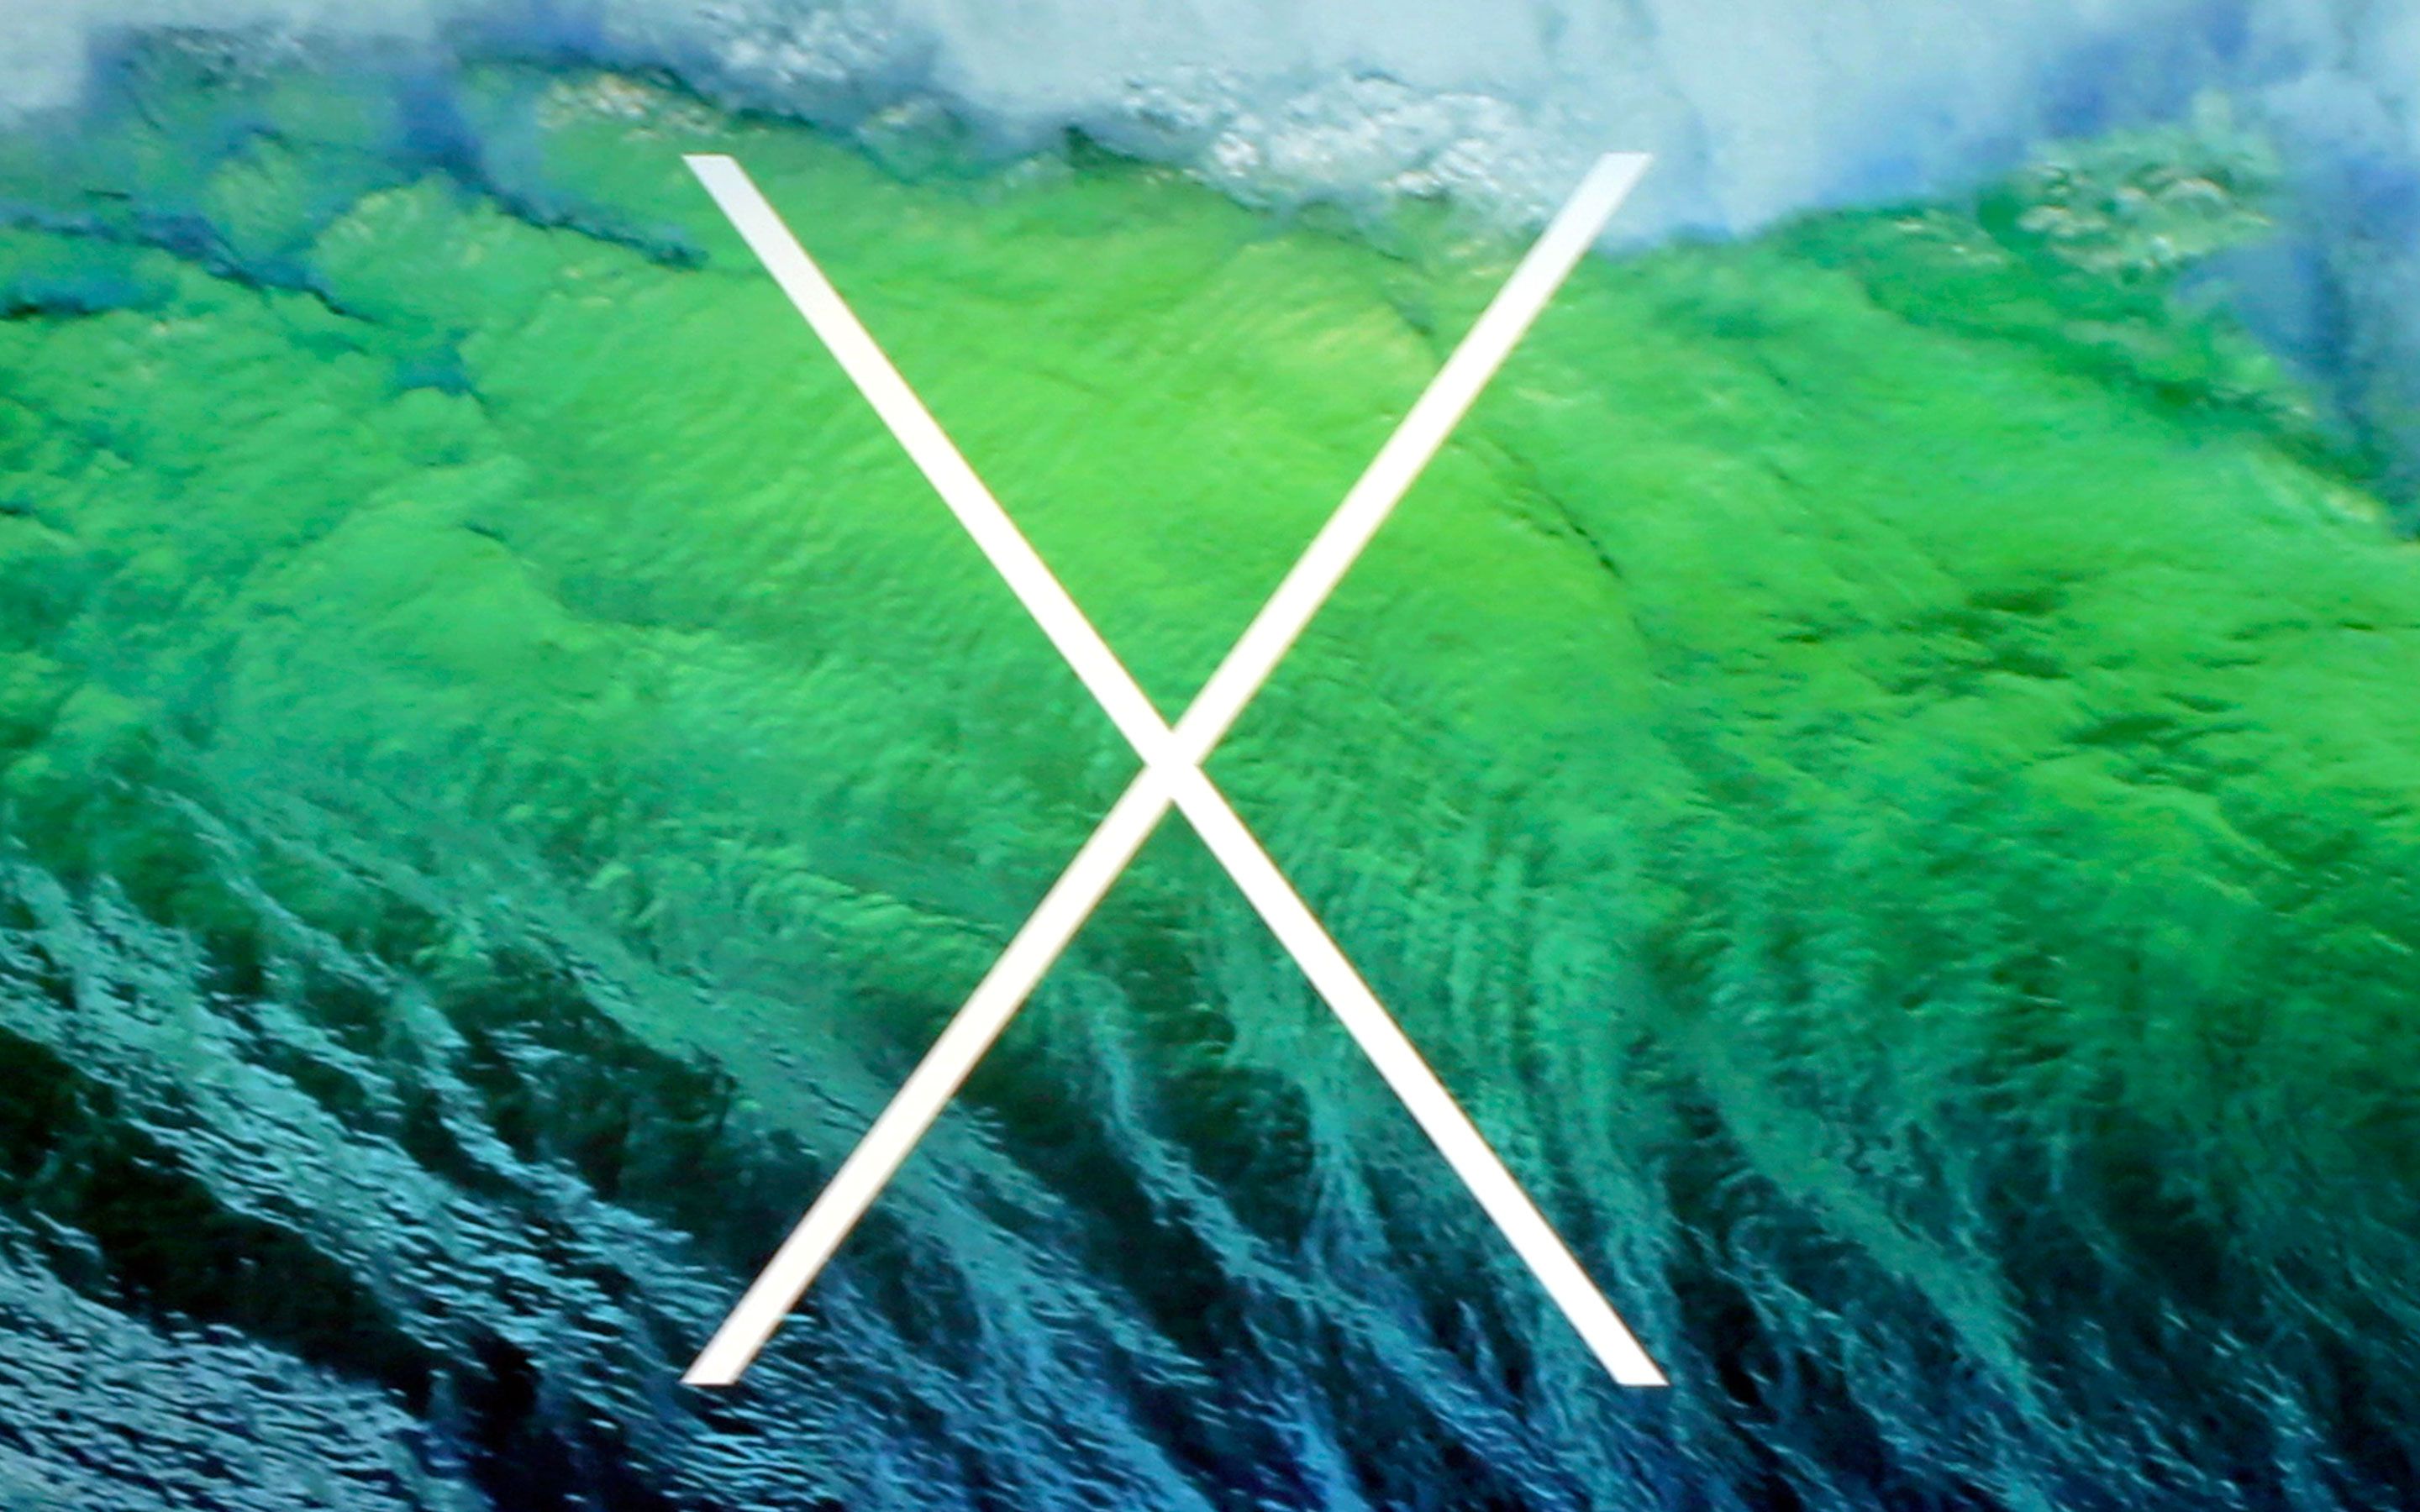 IOS 7 dots, OS X 10.9 wave, and more WWDC 2013 banners plus